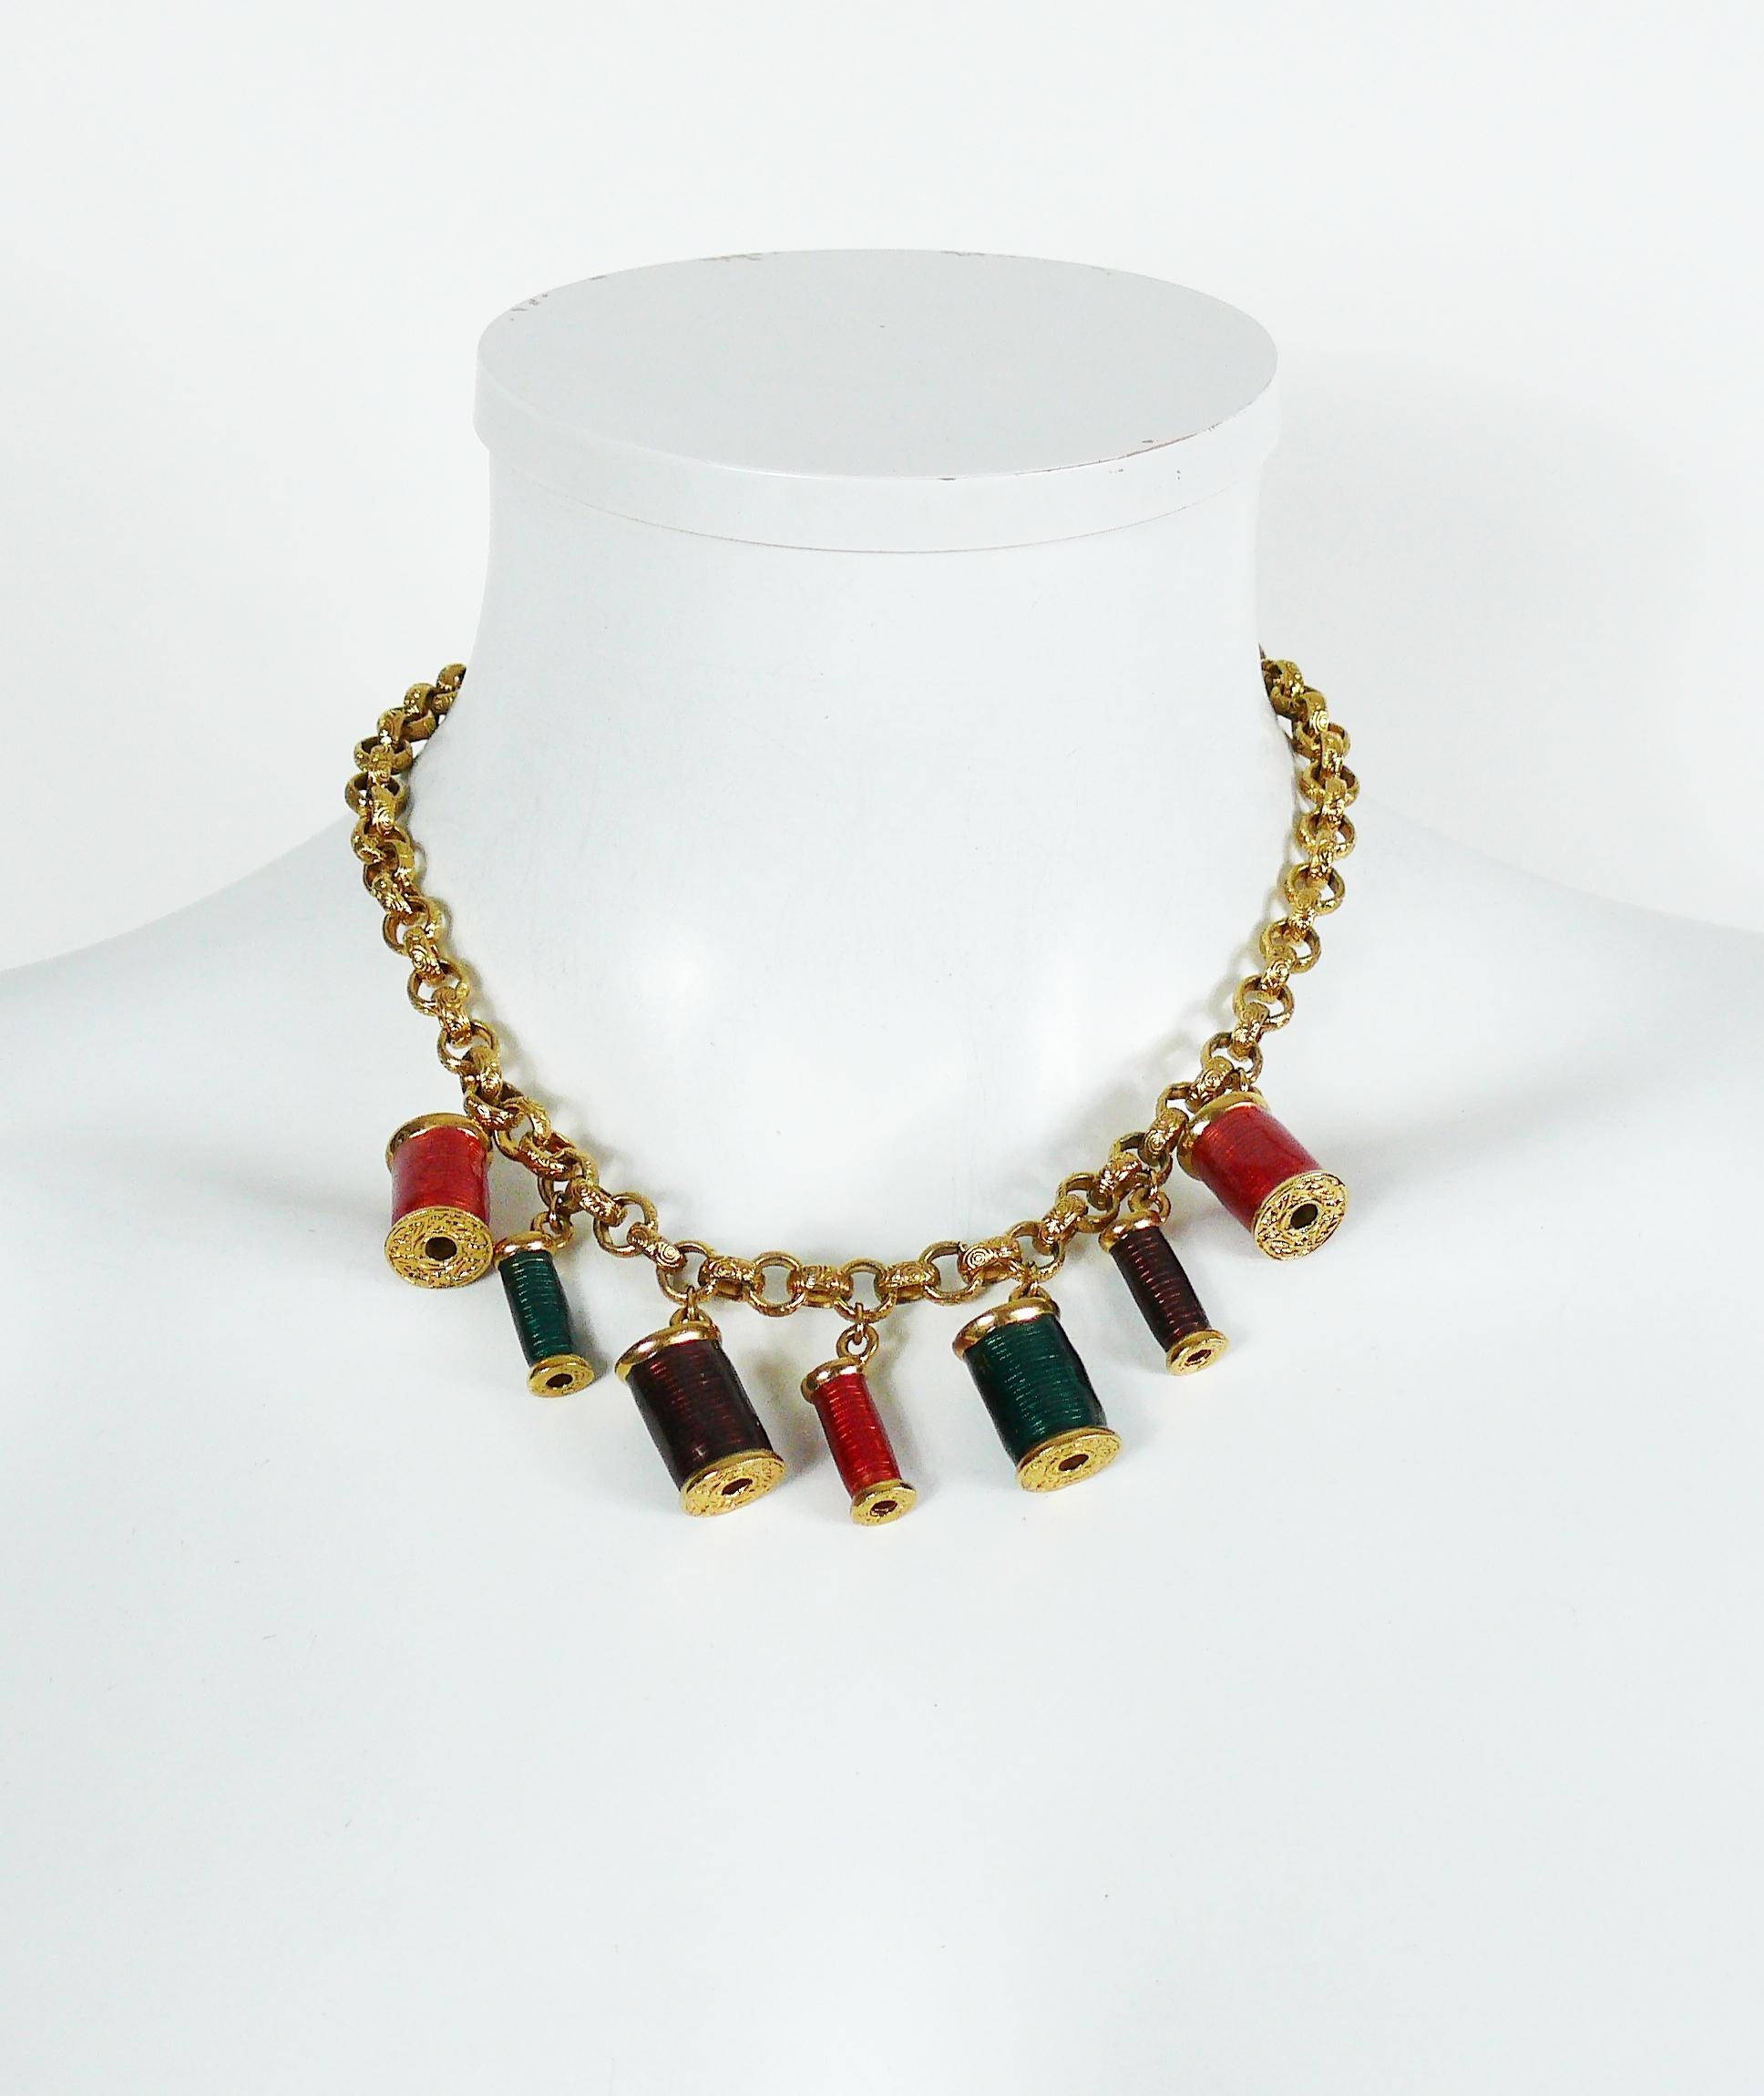 NINA RICCI vintage rare gold toned necklace featuring multicolored enamel sewing thread spool charms.

T-bar closure.

Embossed NINA RICCI.

Indicative measurements : length approx. 43 cm (16.93 inches).

JEWELRY CONDITION CHART
- New or never worn